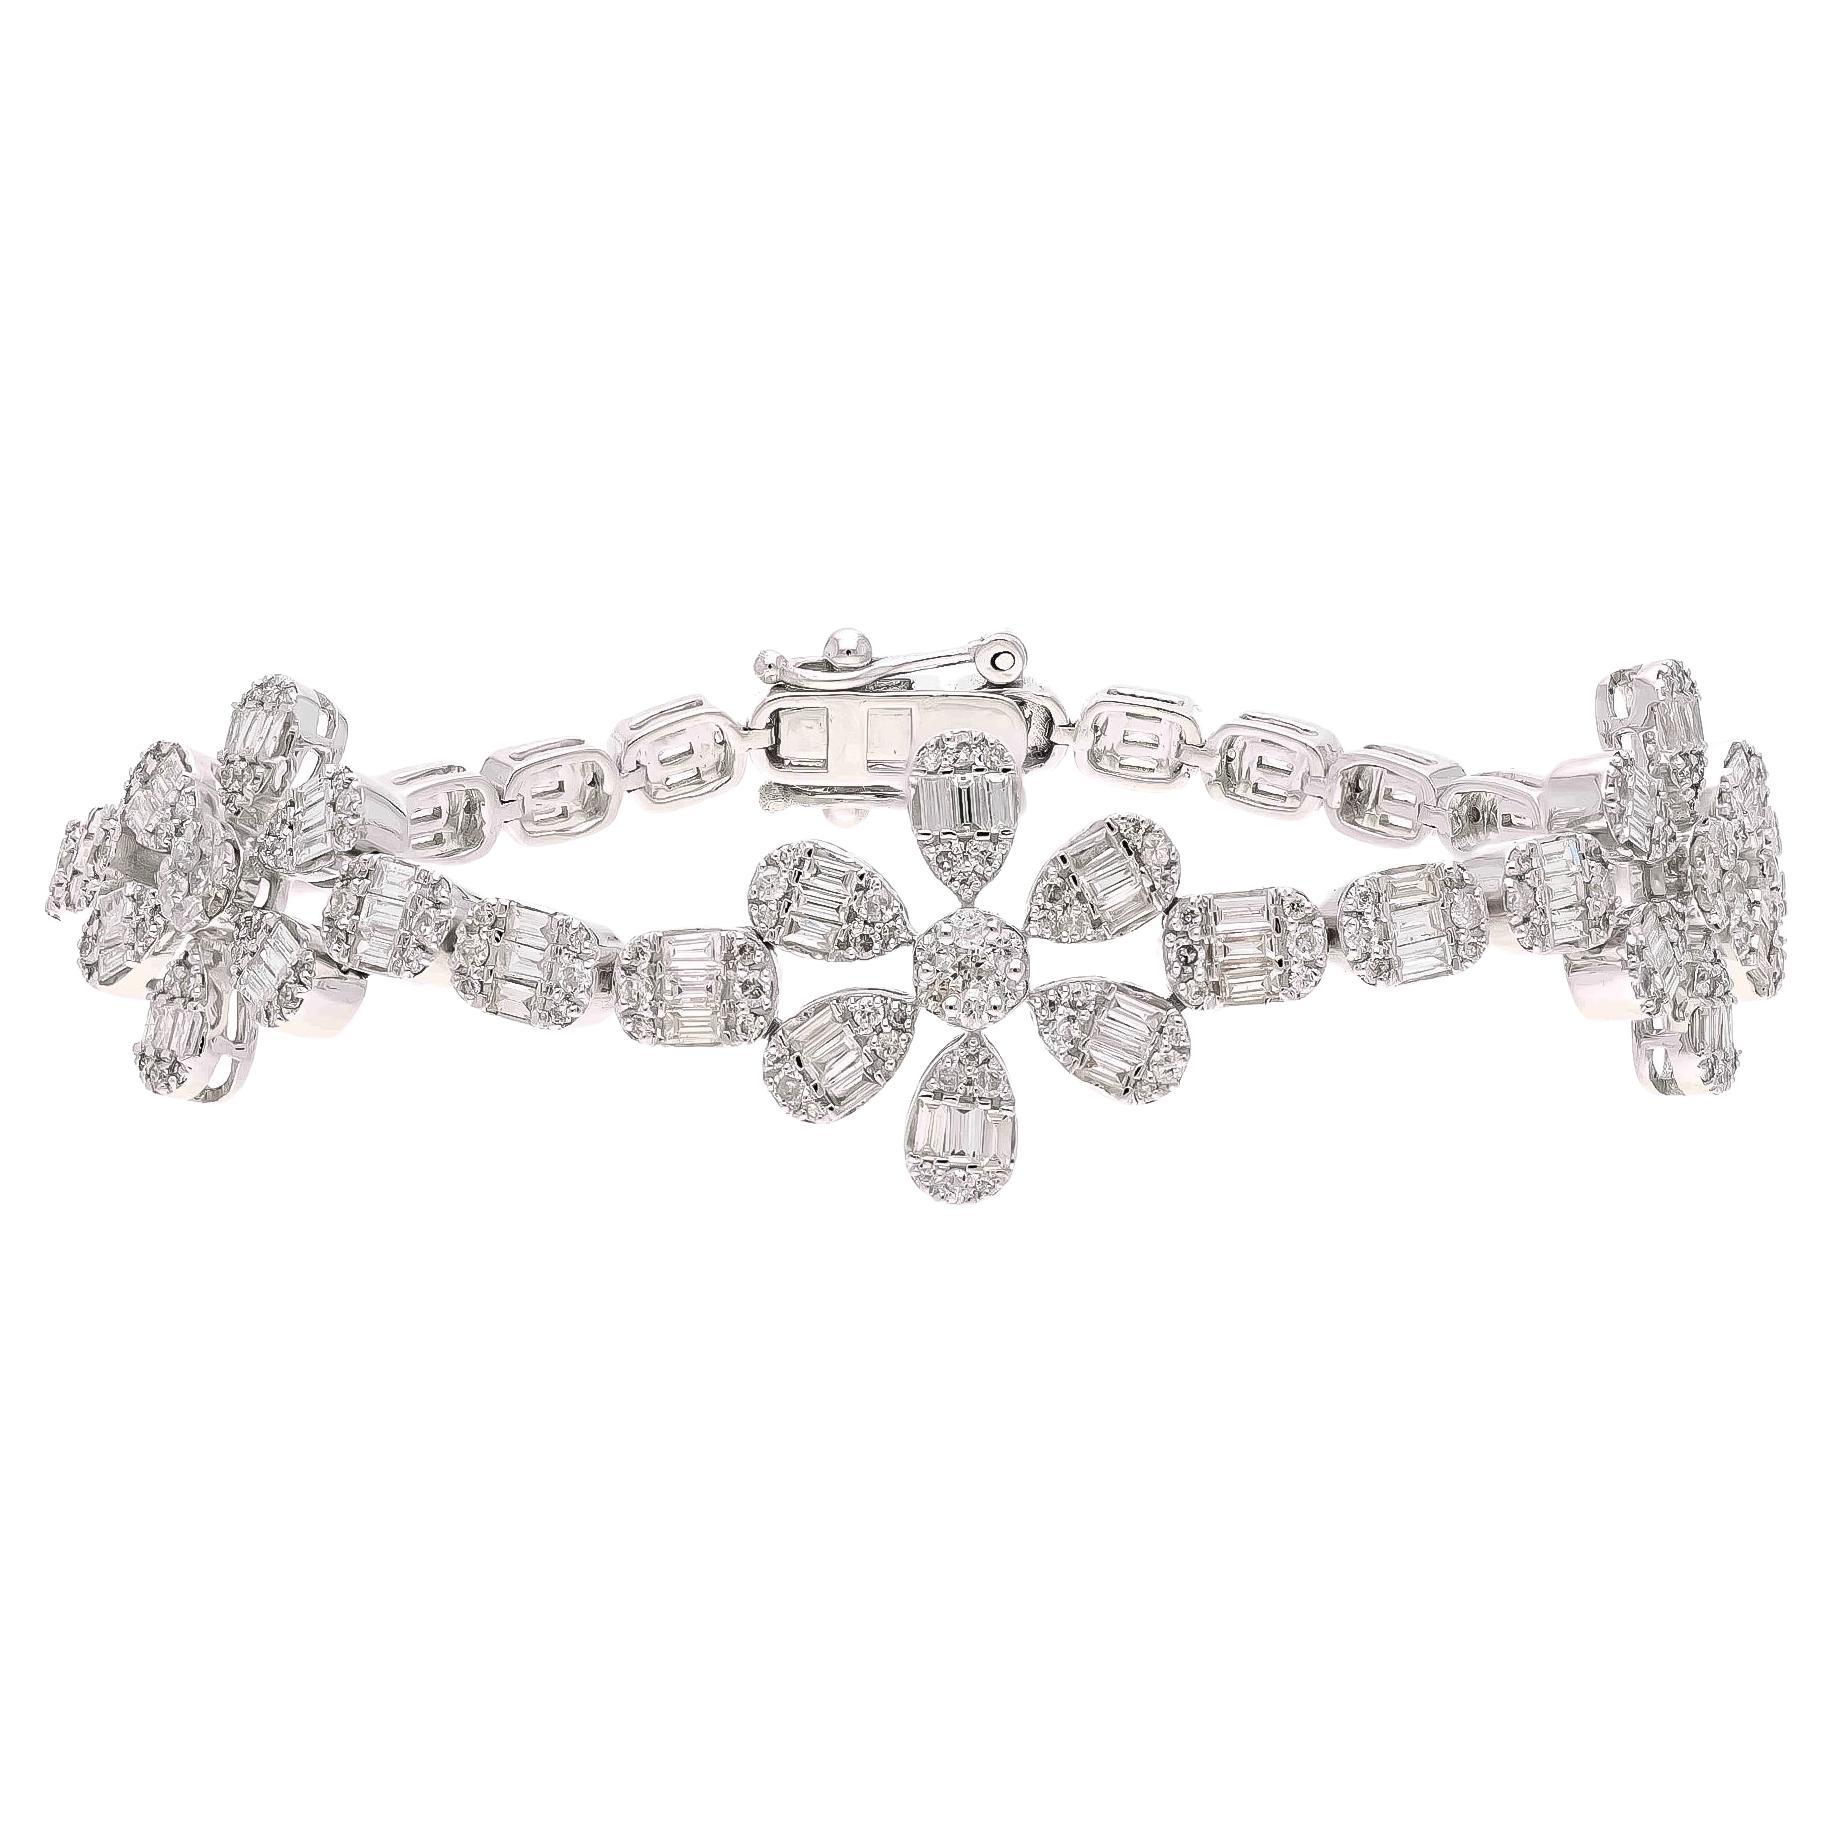 This is a  natural diamond bracelet which has diamonds of very good quality . it has vsi clarity and G colour.

diamonds : 3.96 cts

gold : 18.358 gms

Its very hard to capture the true color and luster of the stone, I have tried to add pictures